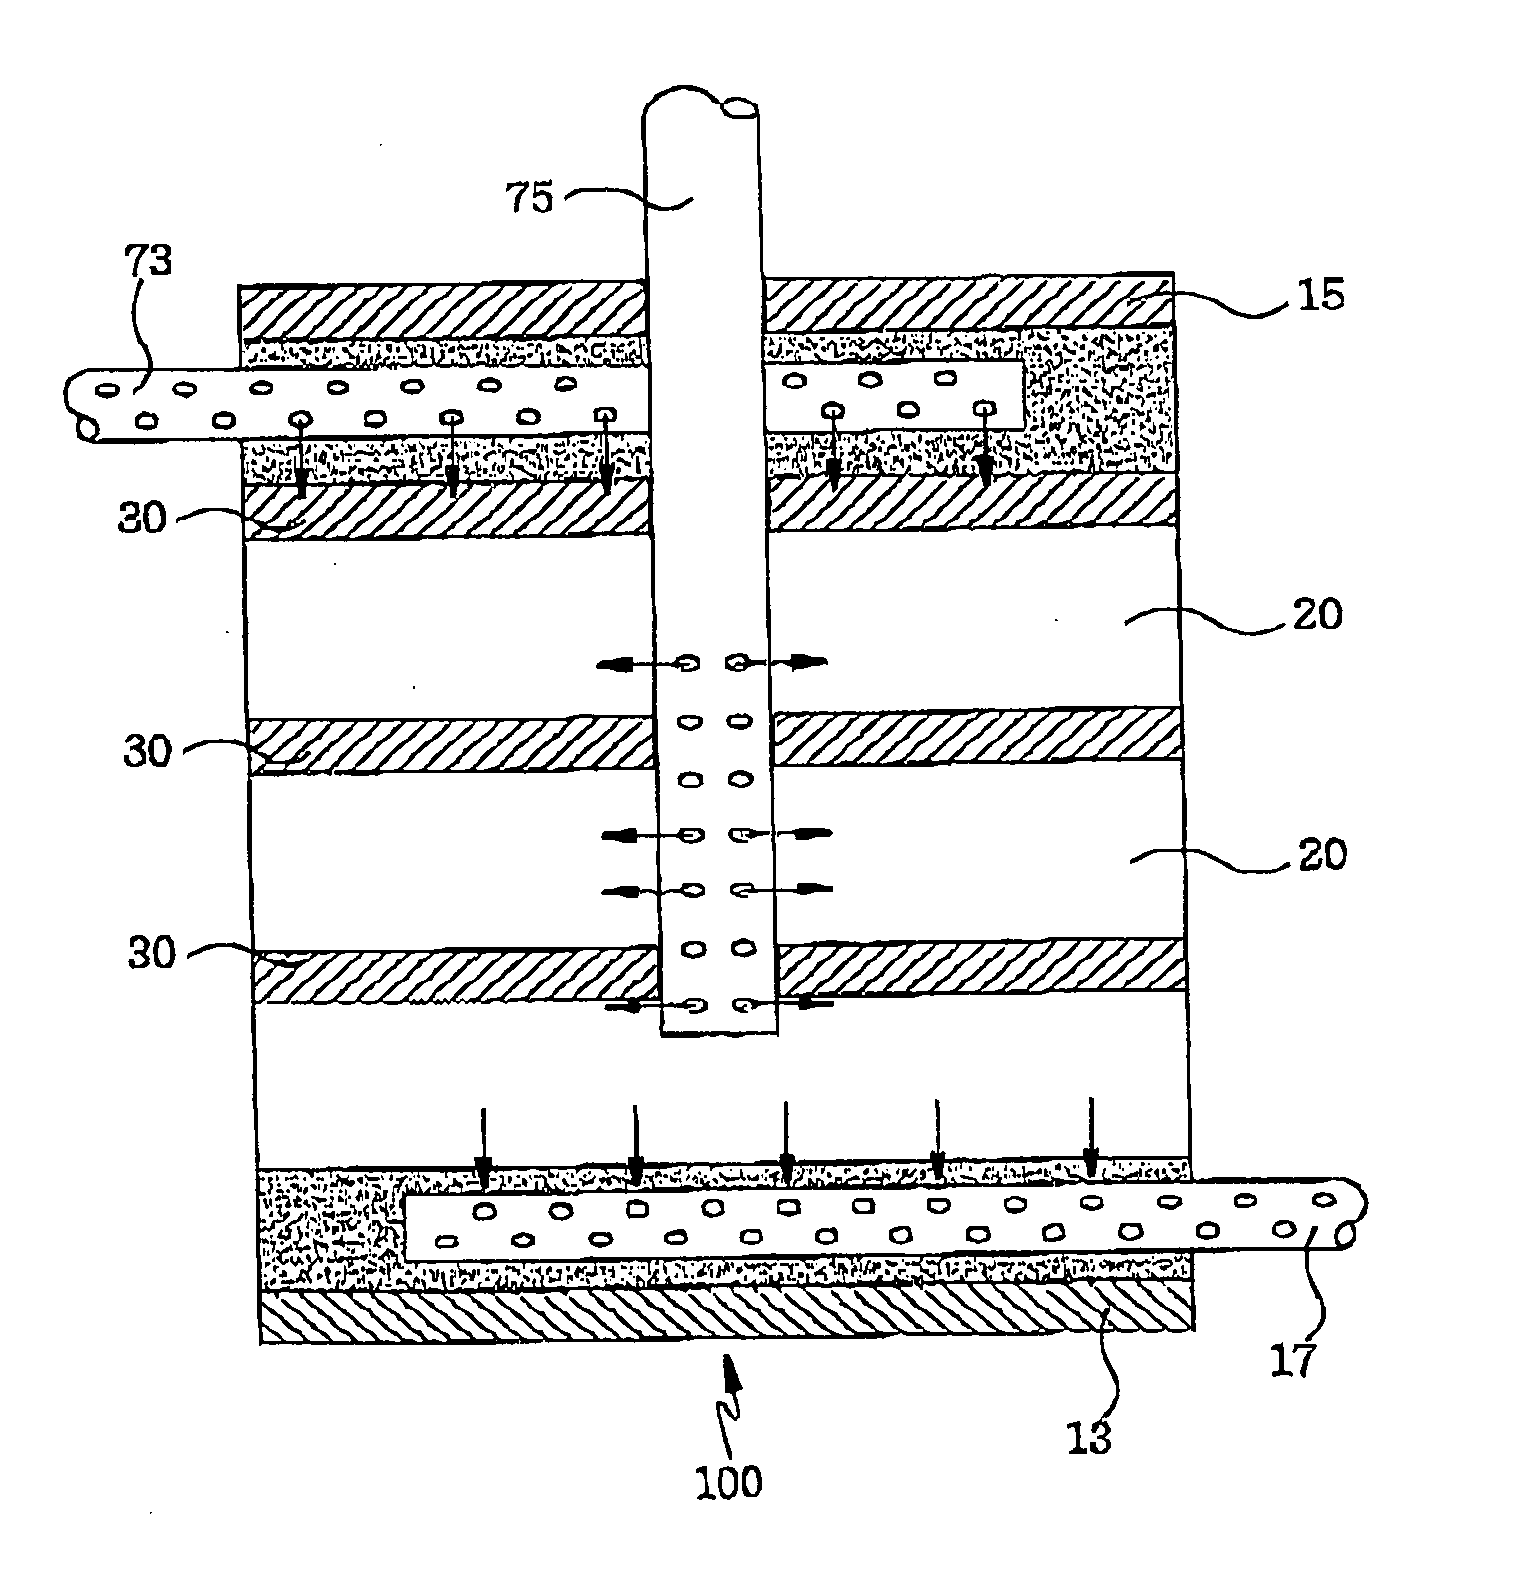 Landfill structure using concept of multi-layered reactors and method for operating the same